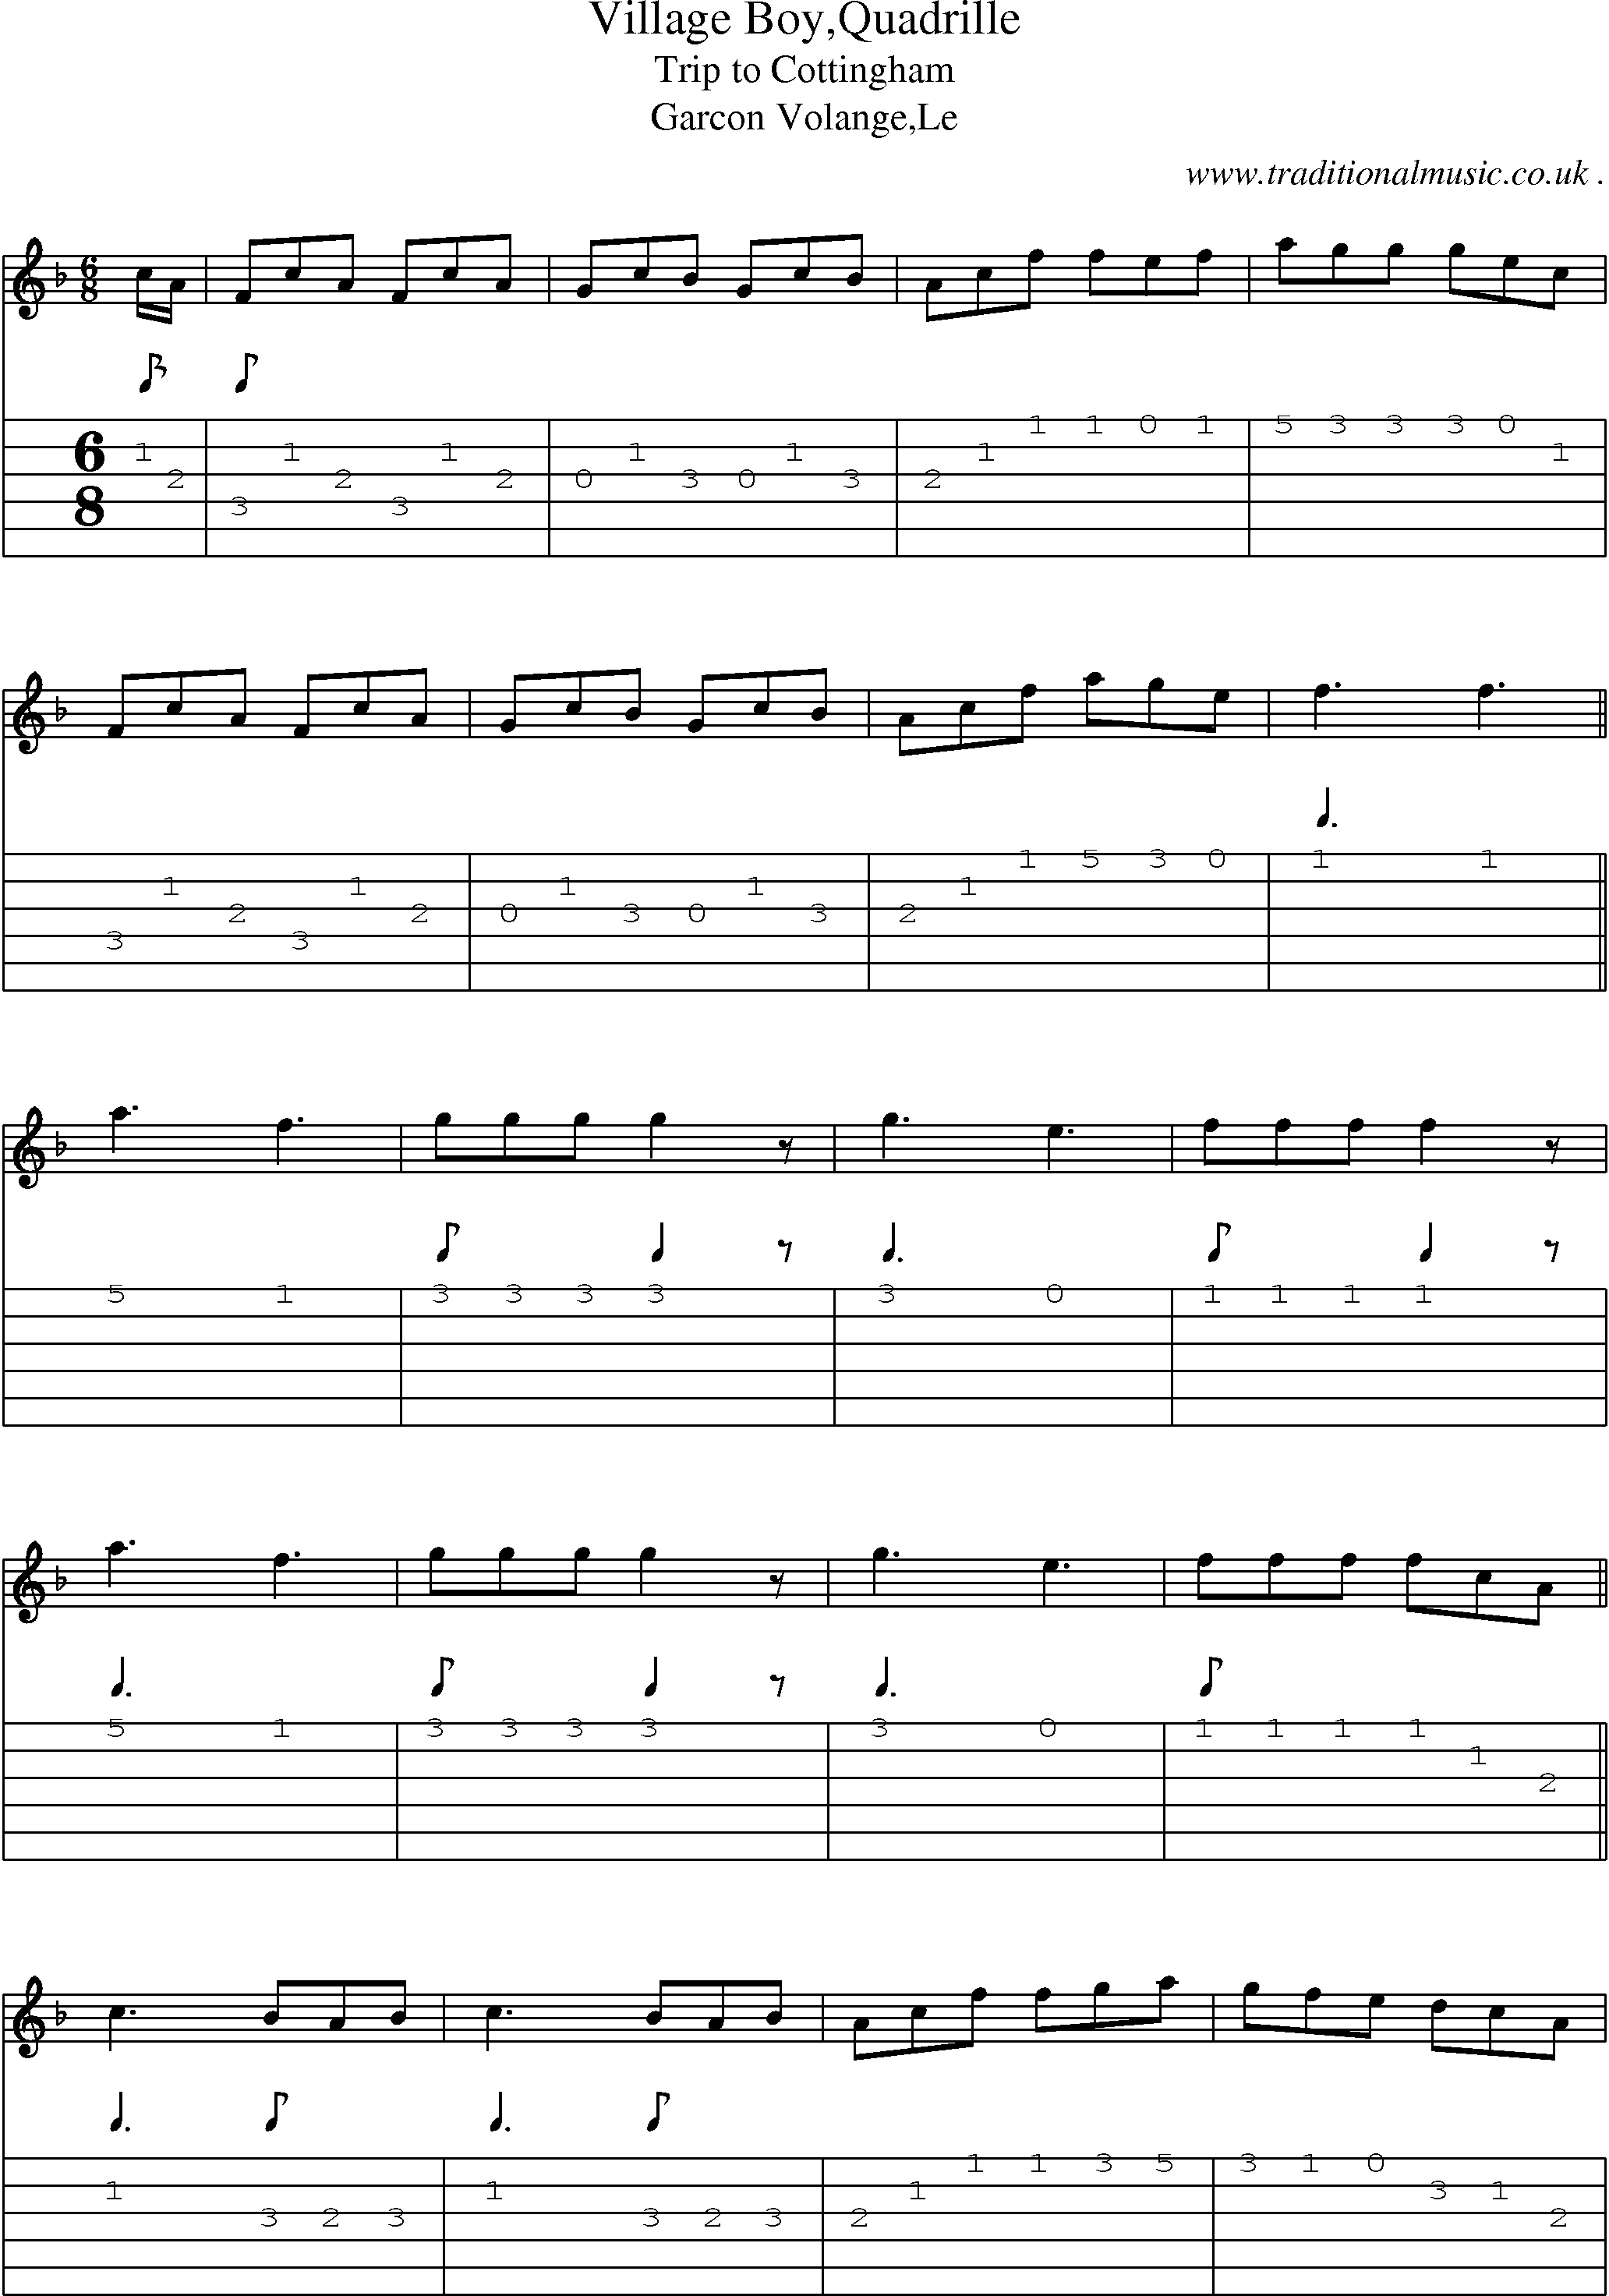 Sheet-Music and Guitar Tabs for Village Boyquadrille